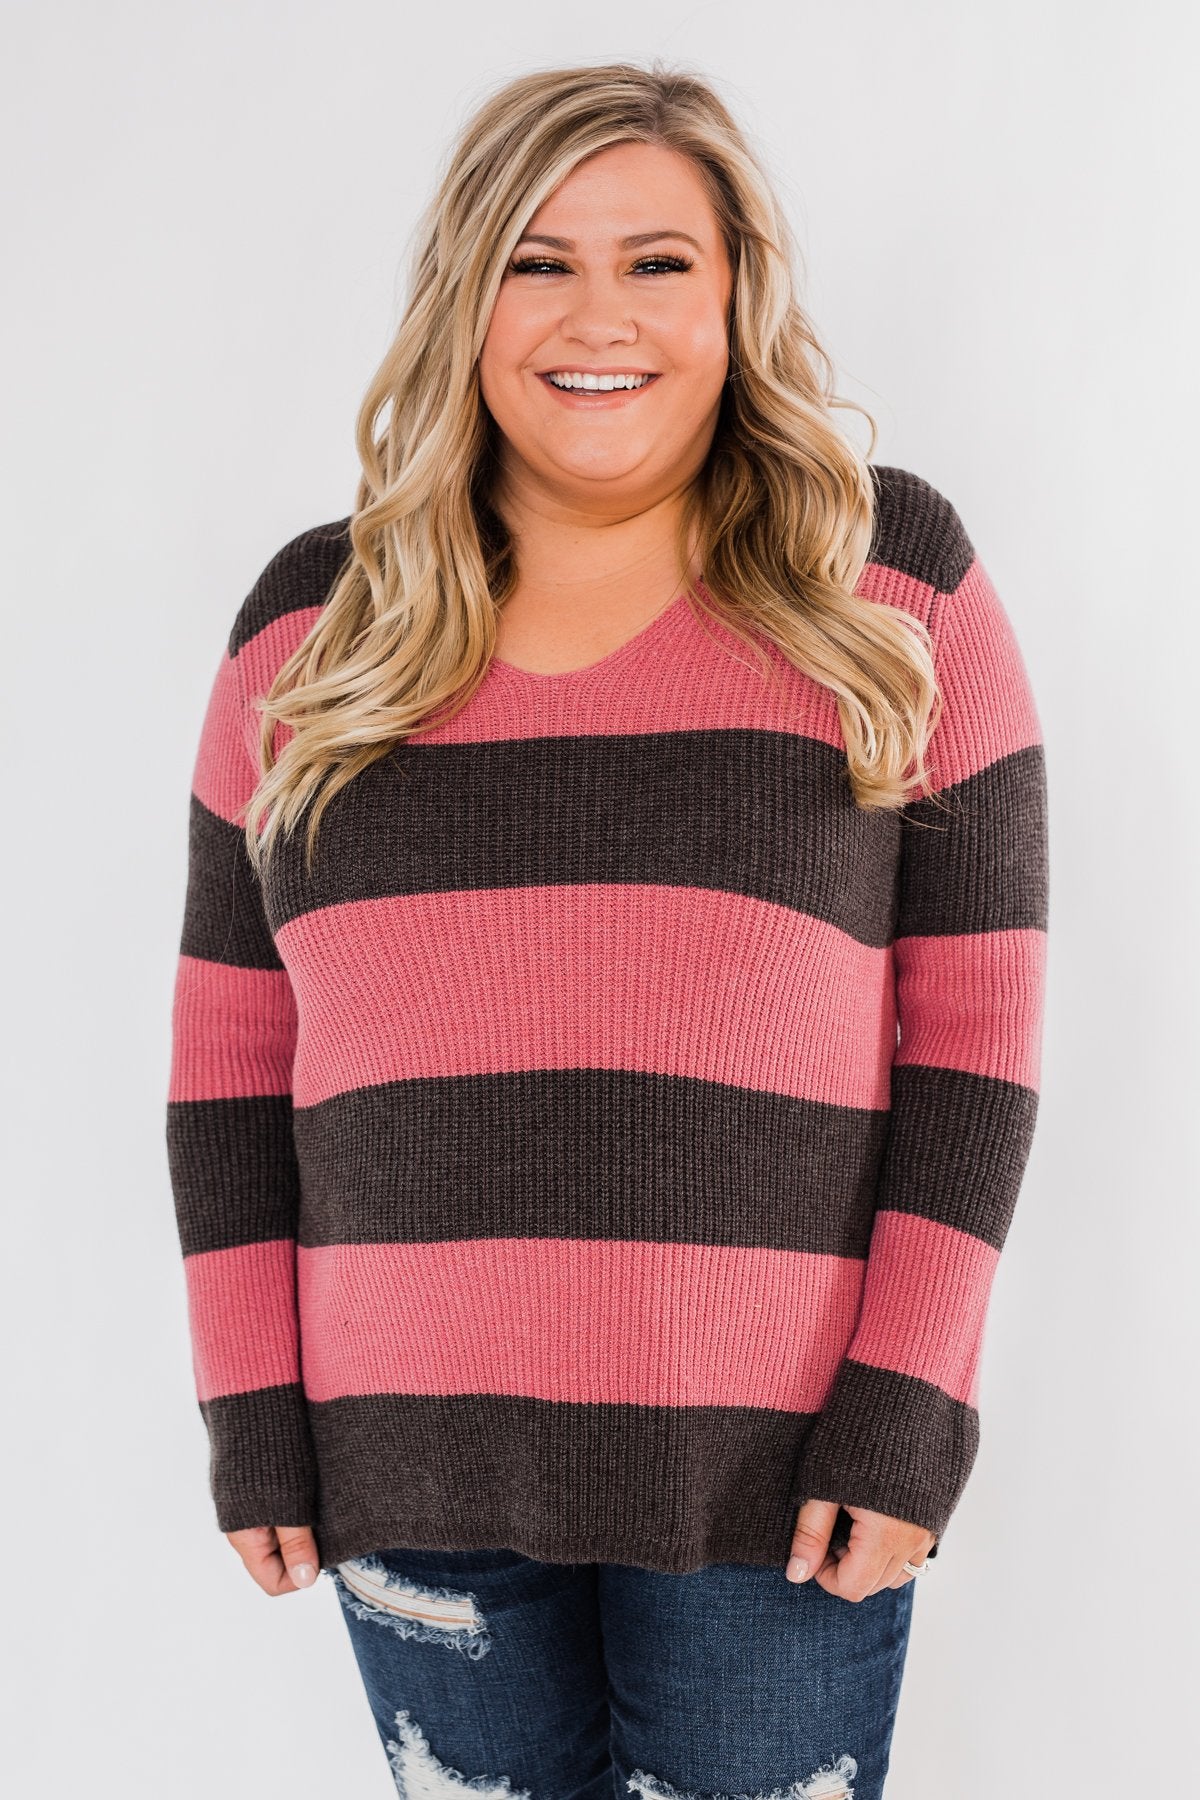 Striped Knit Sweater- Pink & Charcoal